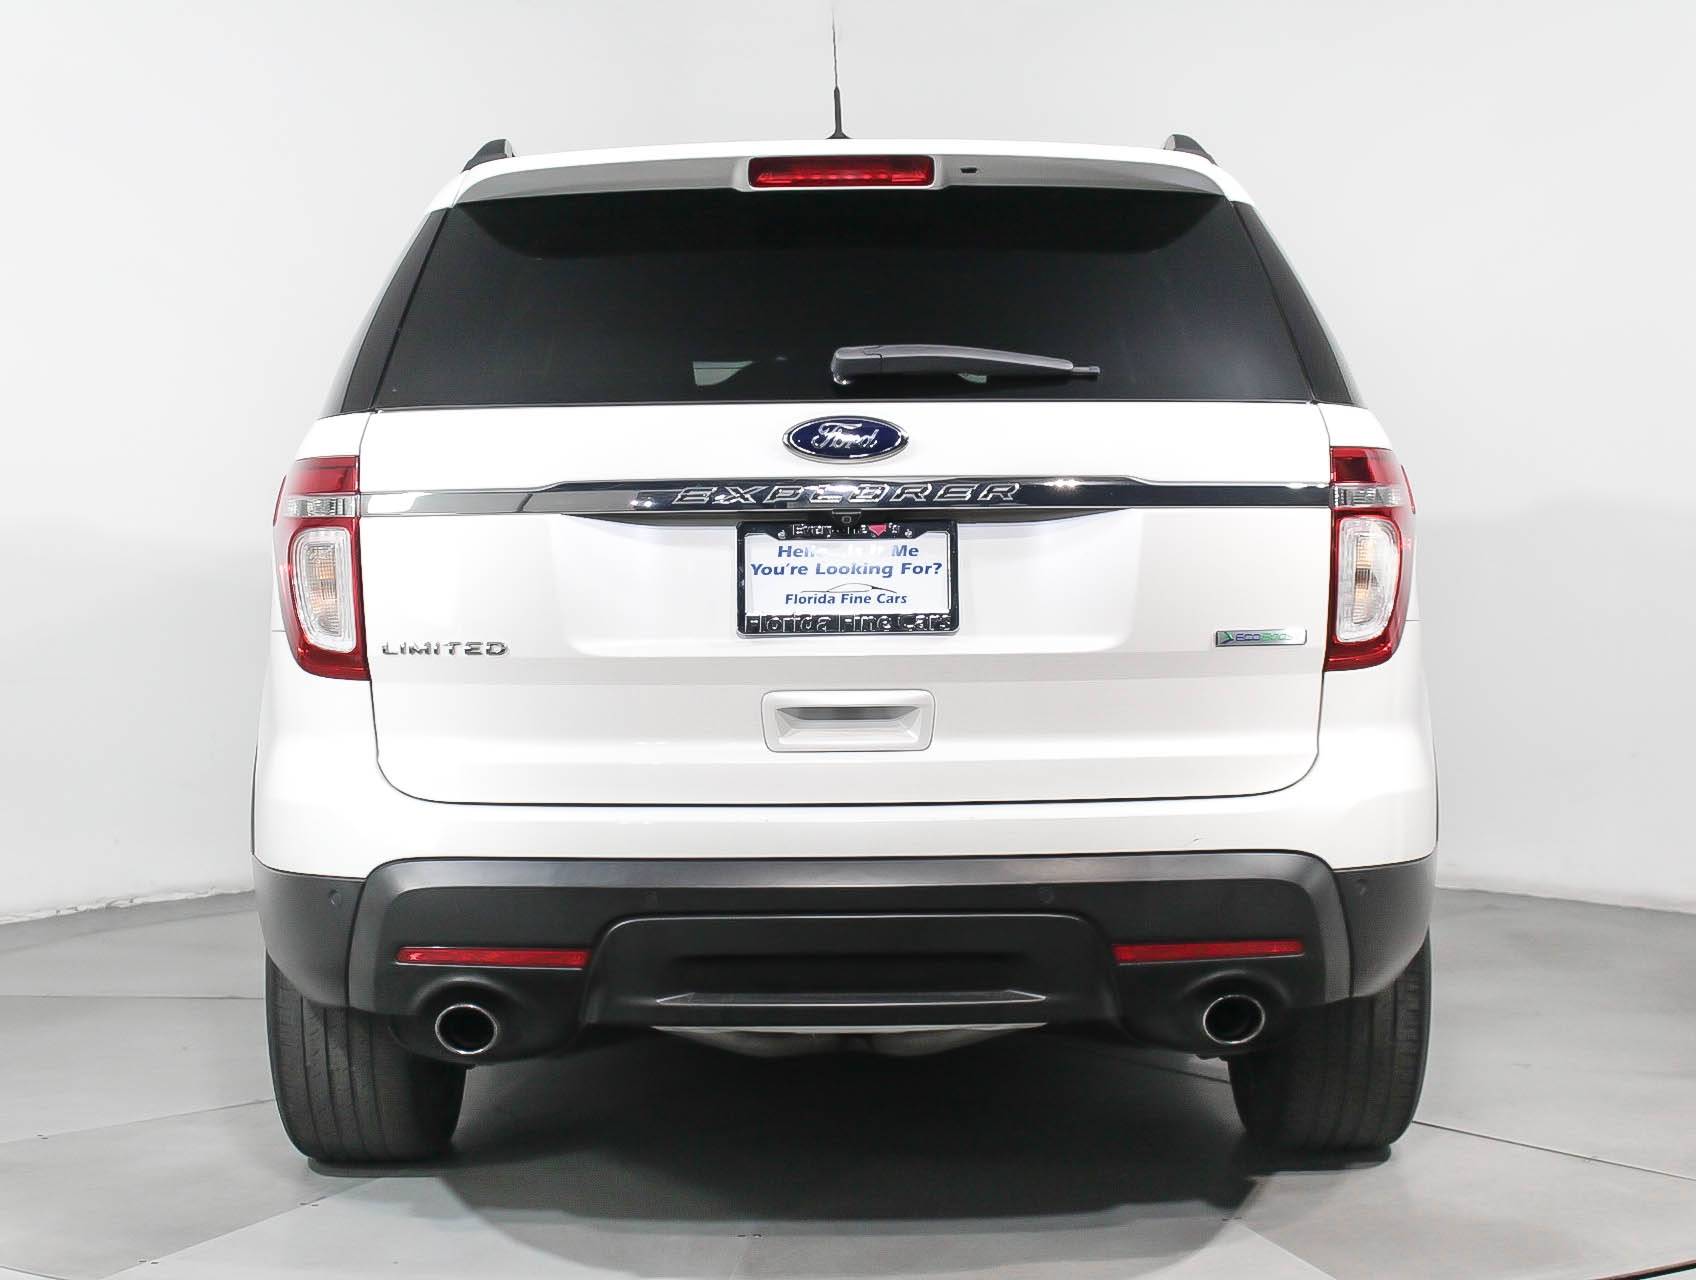 Florida Fine Cars - Used FORD EXPLORER 2013 MIAMI Limited Ecoboost